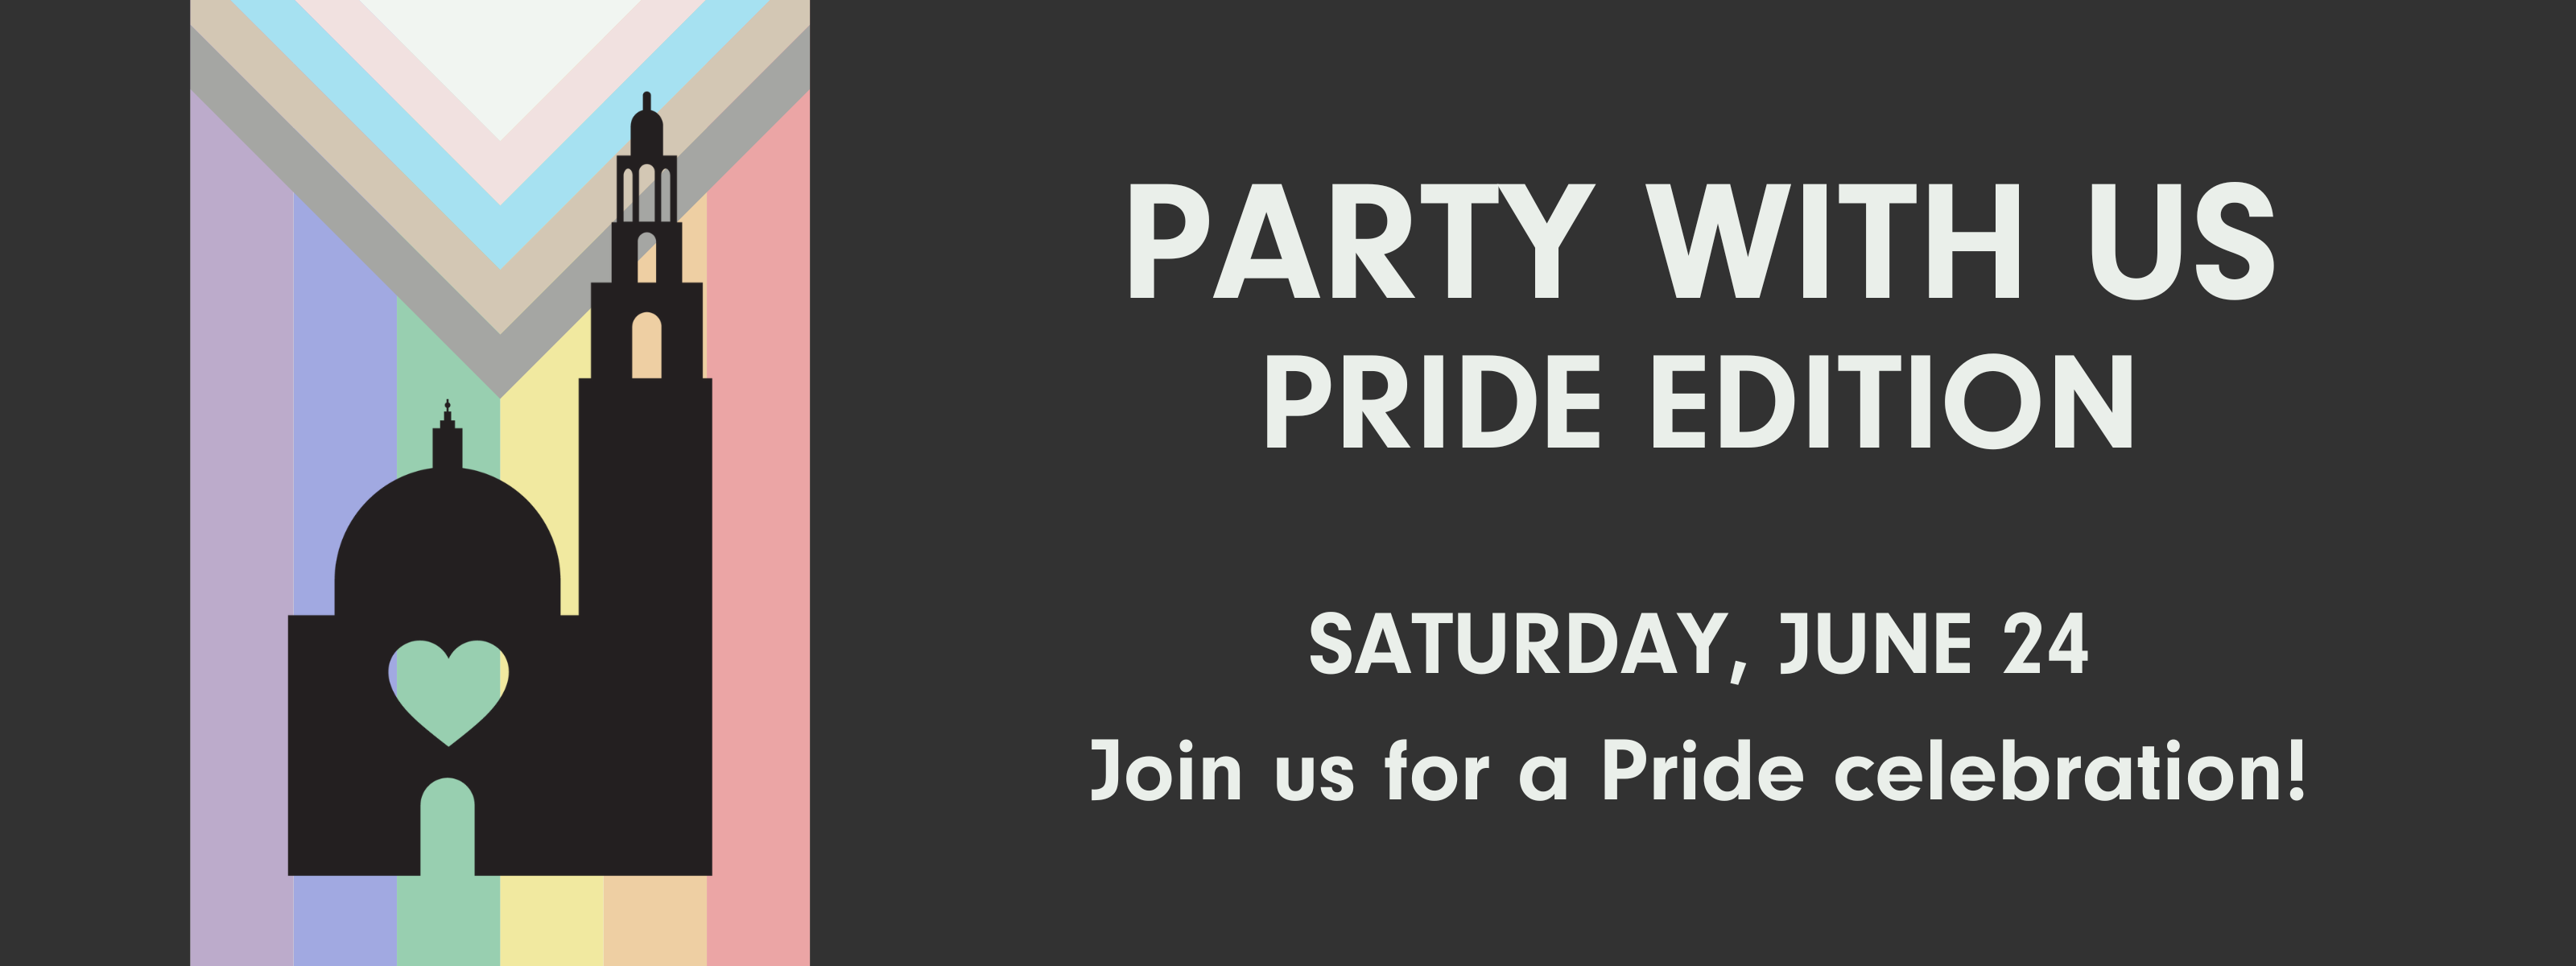 Graphically designed image with a progress pride flag on the left side of the image on an off-black background. The Museum's icon logo is on top of the flag in an off-black color to match the background. White text on the right of the image reads, "Party with Us Pride Edition Saturday, June 24, Join us for a Pride celebration!"